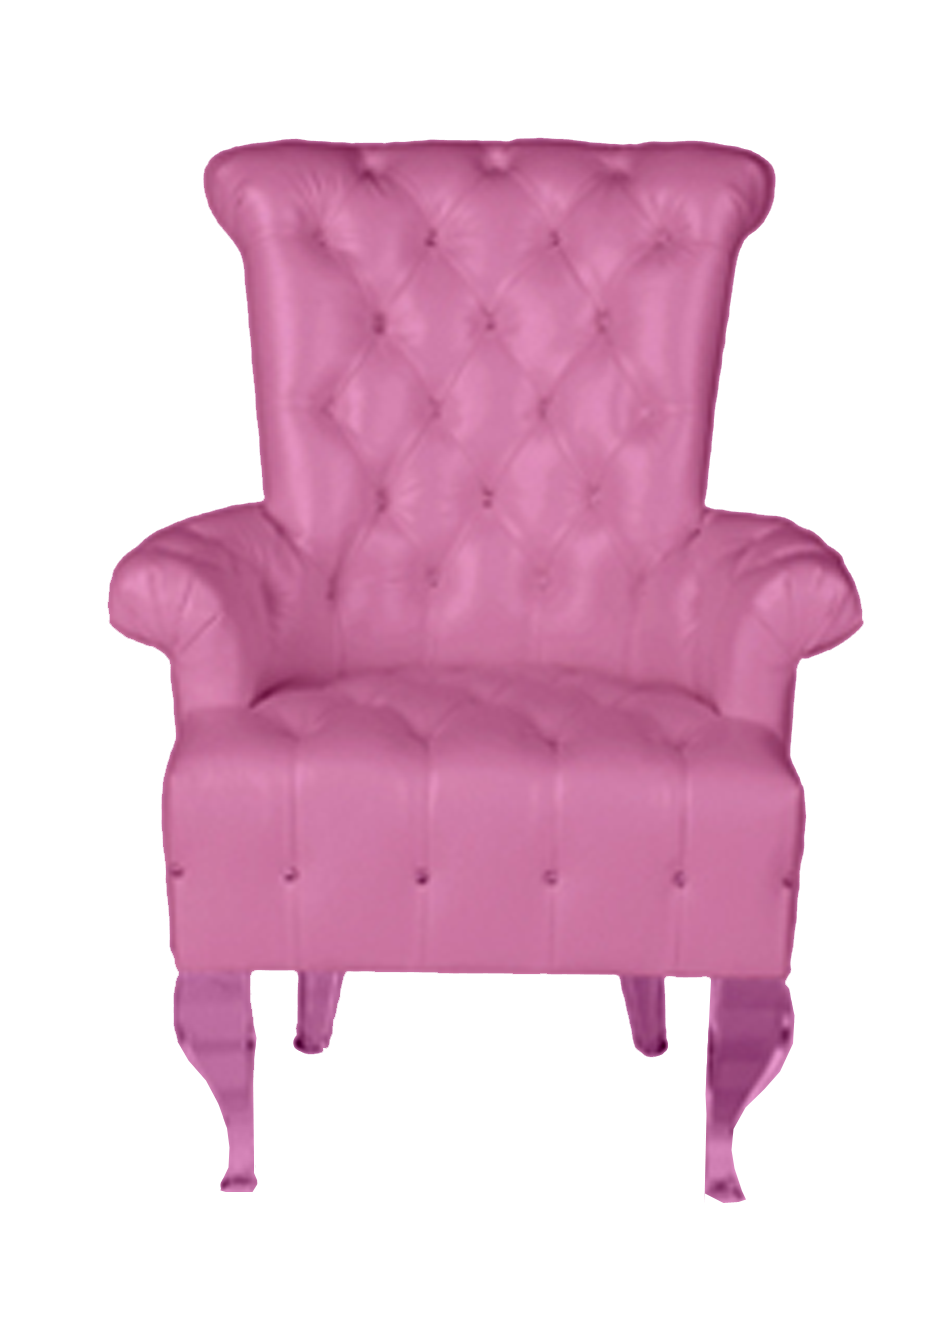 Bestof You: Best 26 Pink Tufted Chair With Ottoman References Of The ...